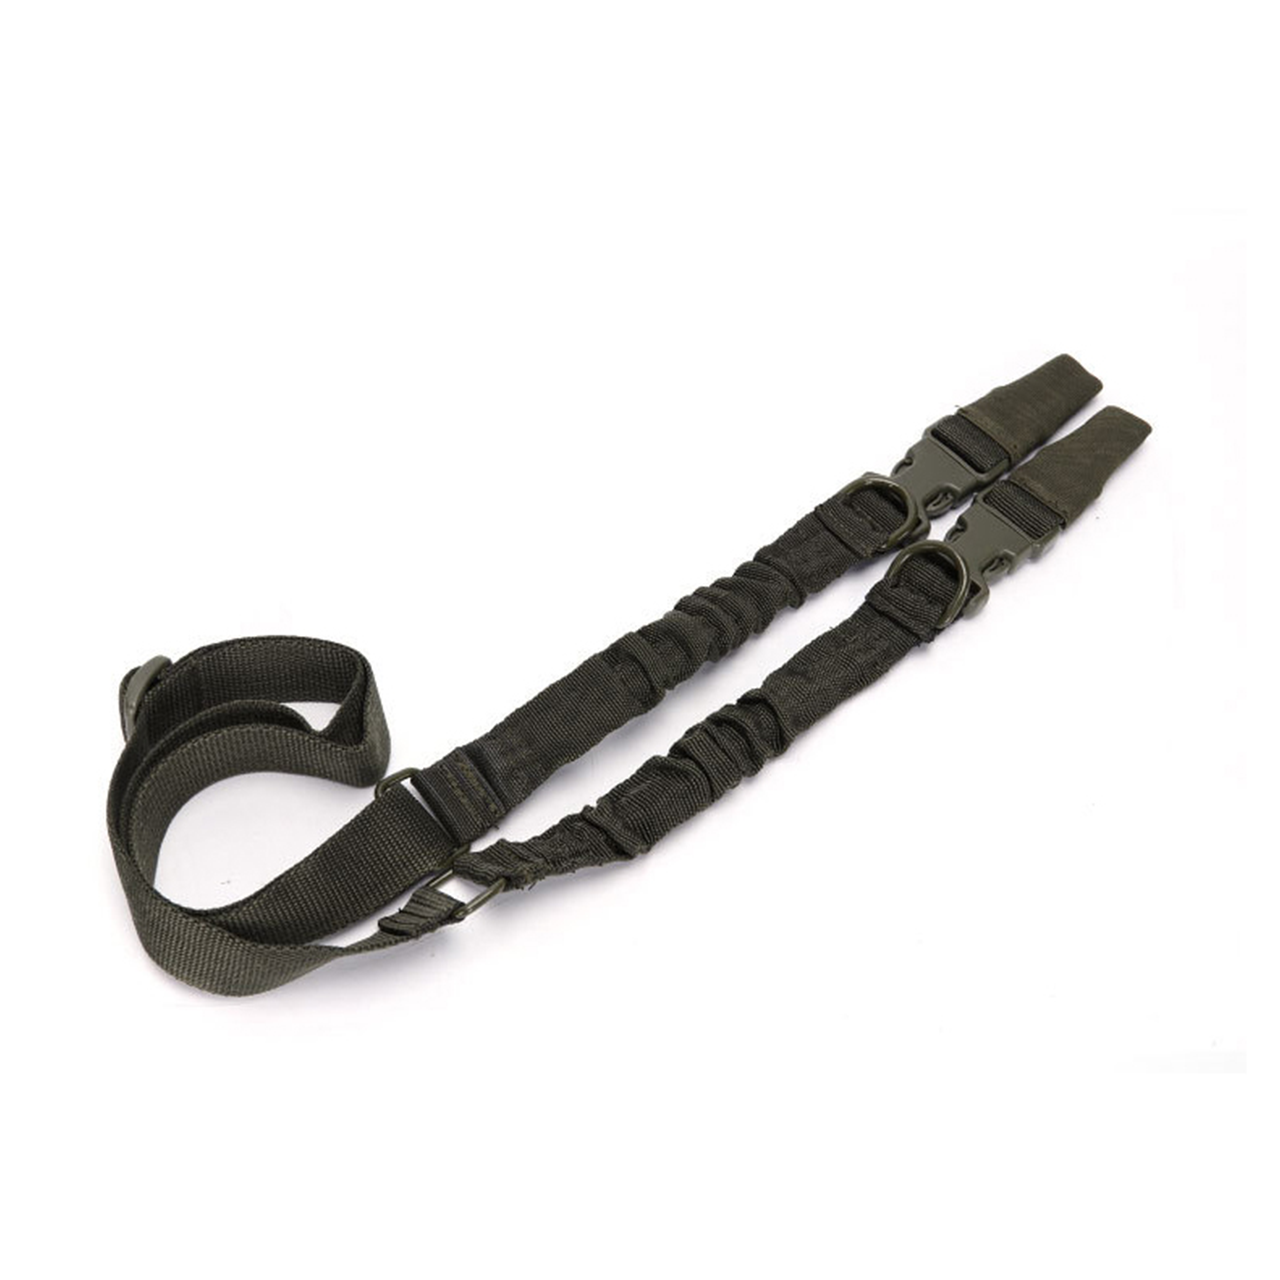 Tactical 2 Point / 1 Point Sling Black